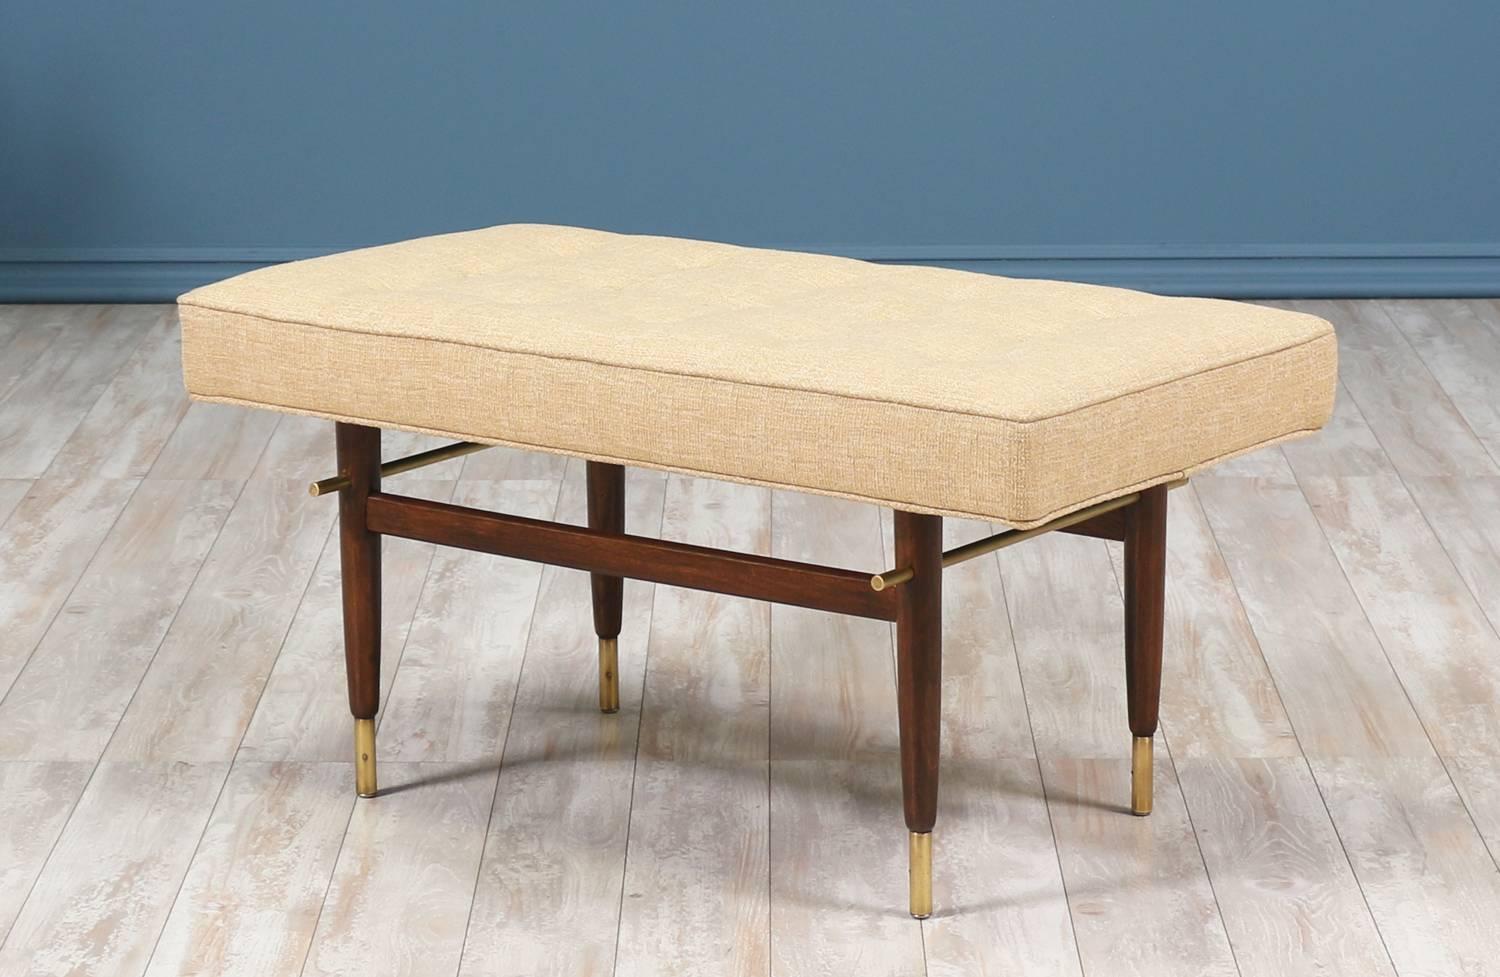 Mid-Century Modern tufted bench designed and manufactured in the United States, circa 1960s. This bench features a walnut wood base with two brass side stretchers and elegant brass sabots on all four tapered legs. The new high-density foam seat